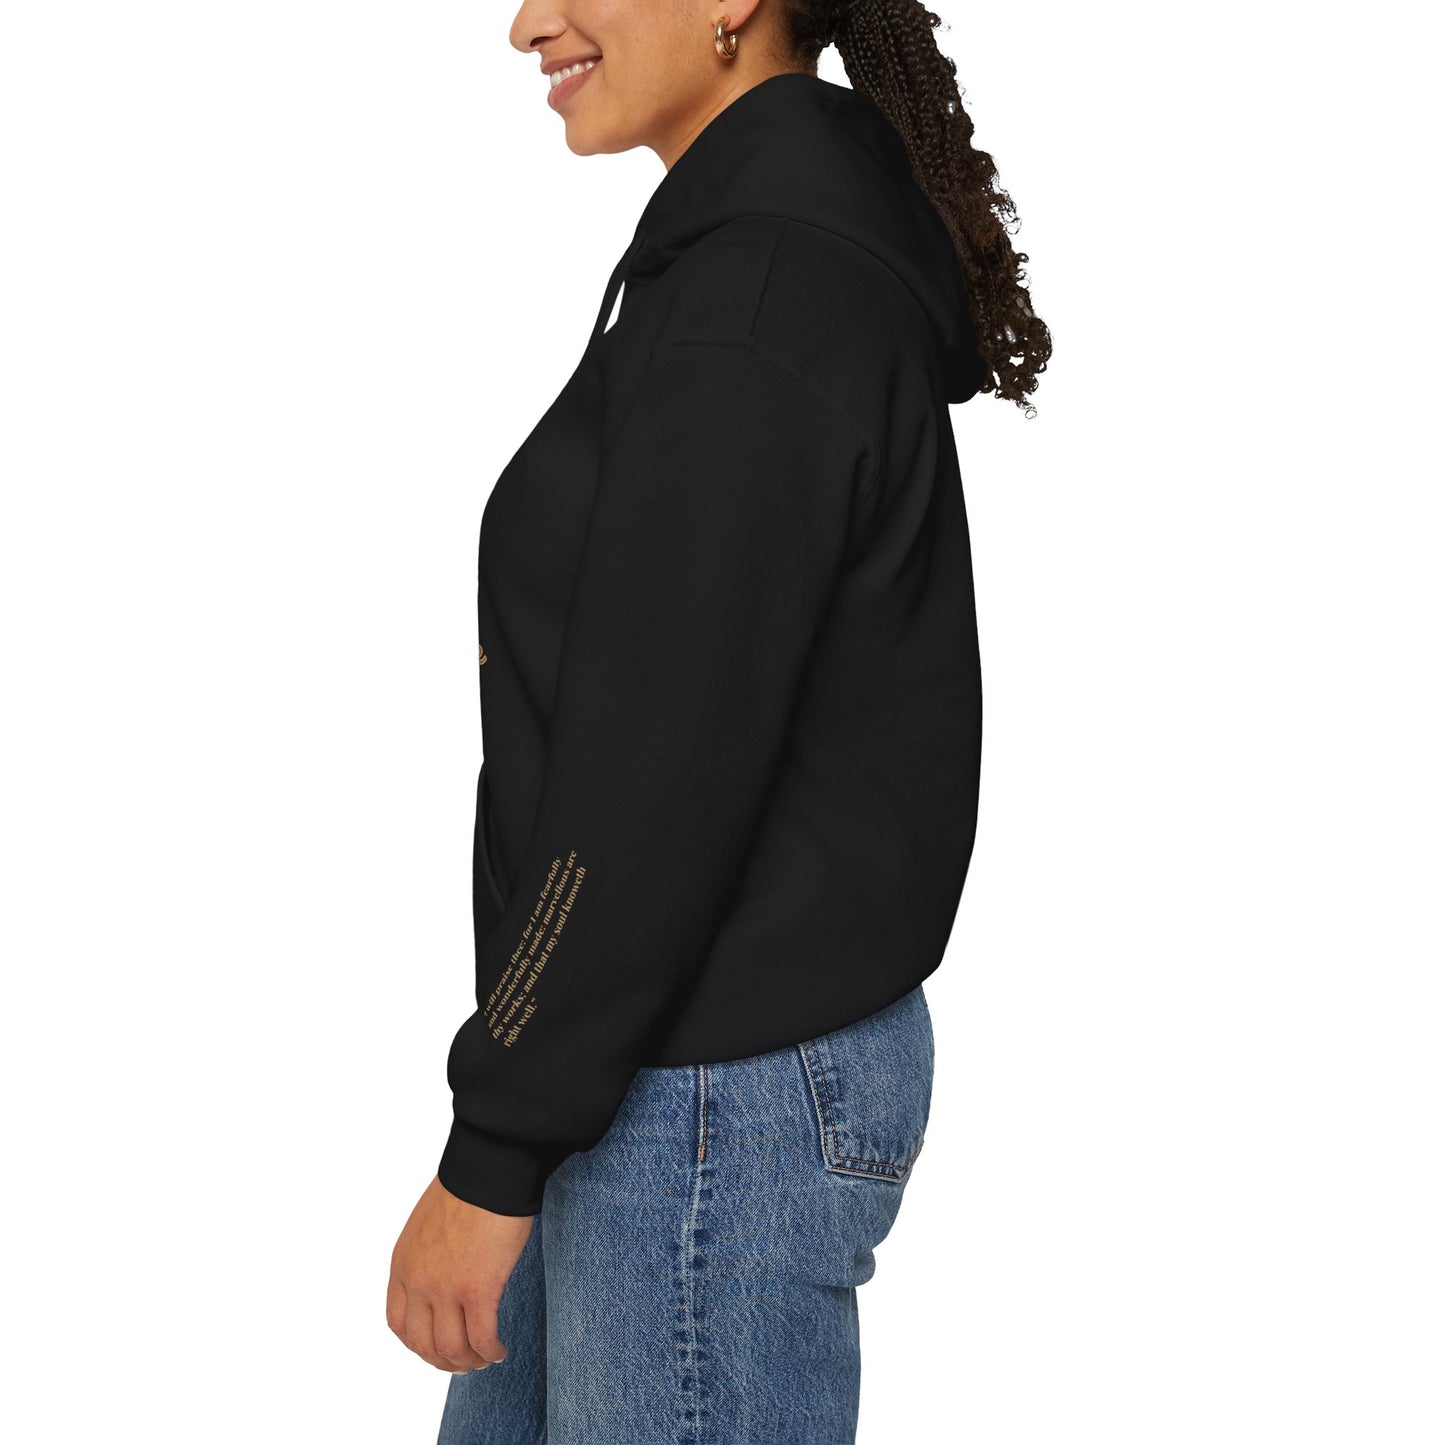 Fearfully and Wonderfully Made Hoodie (Female)